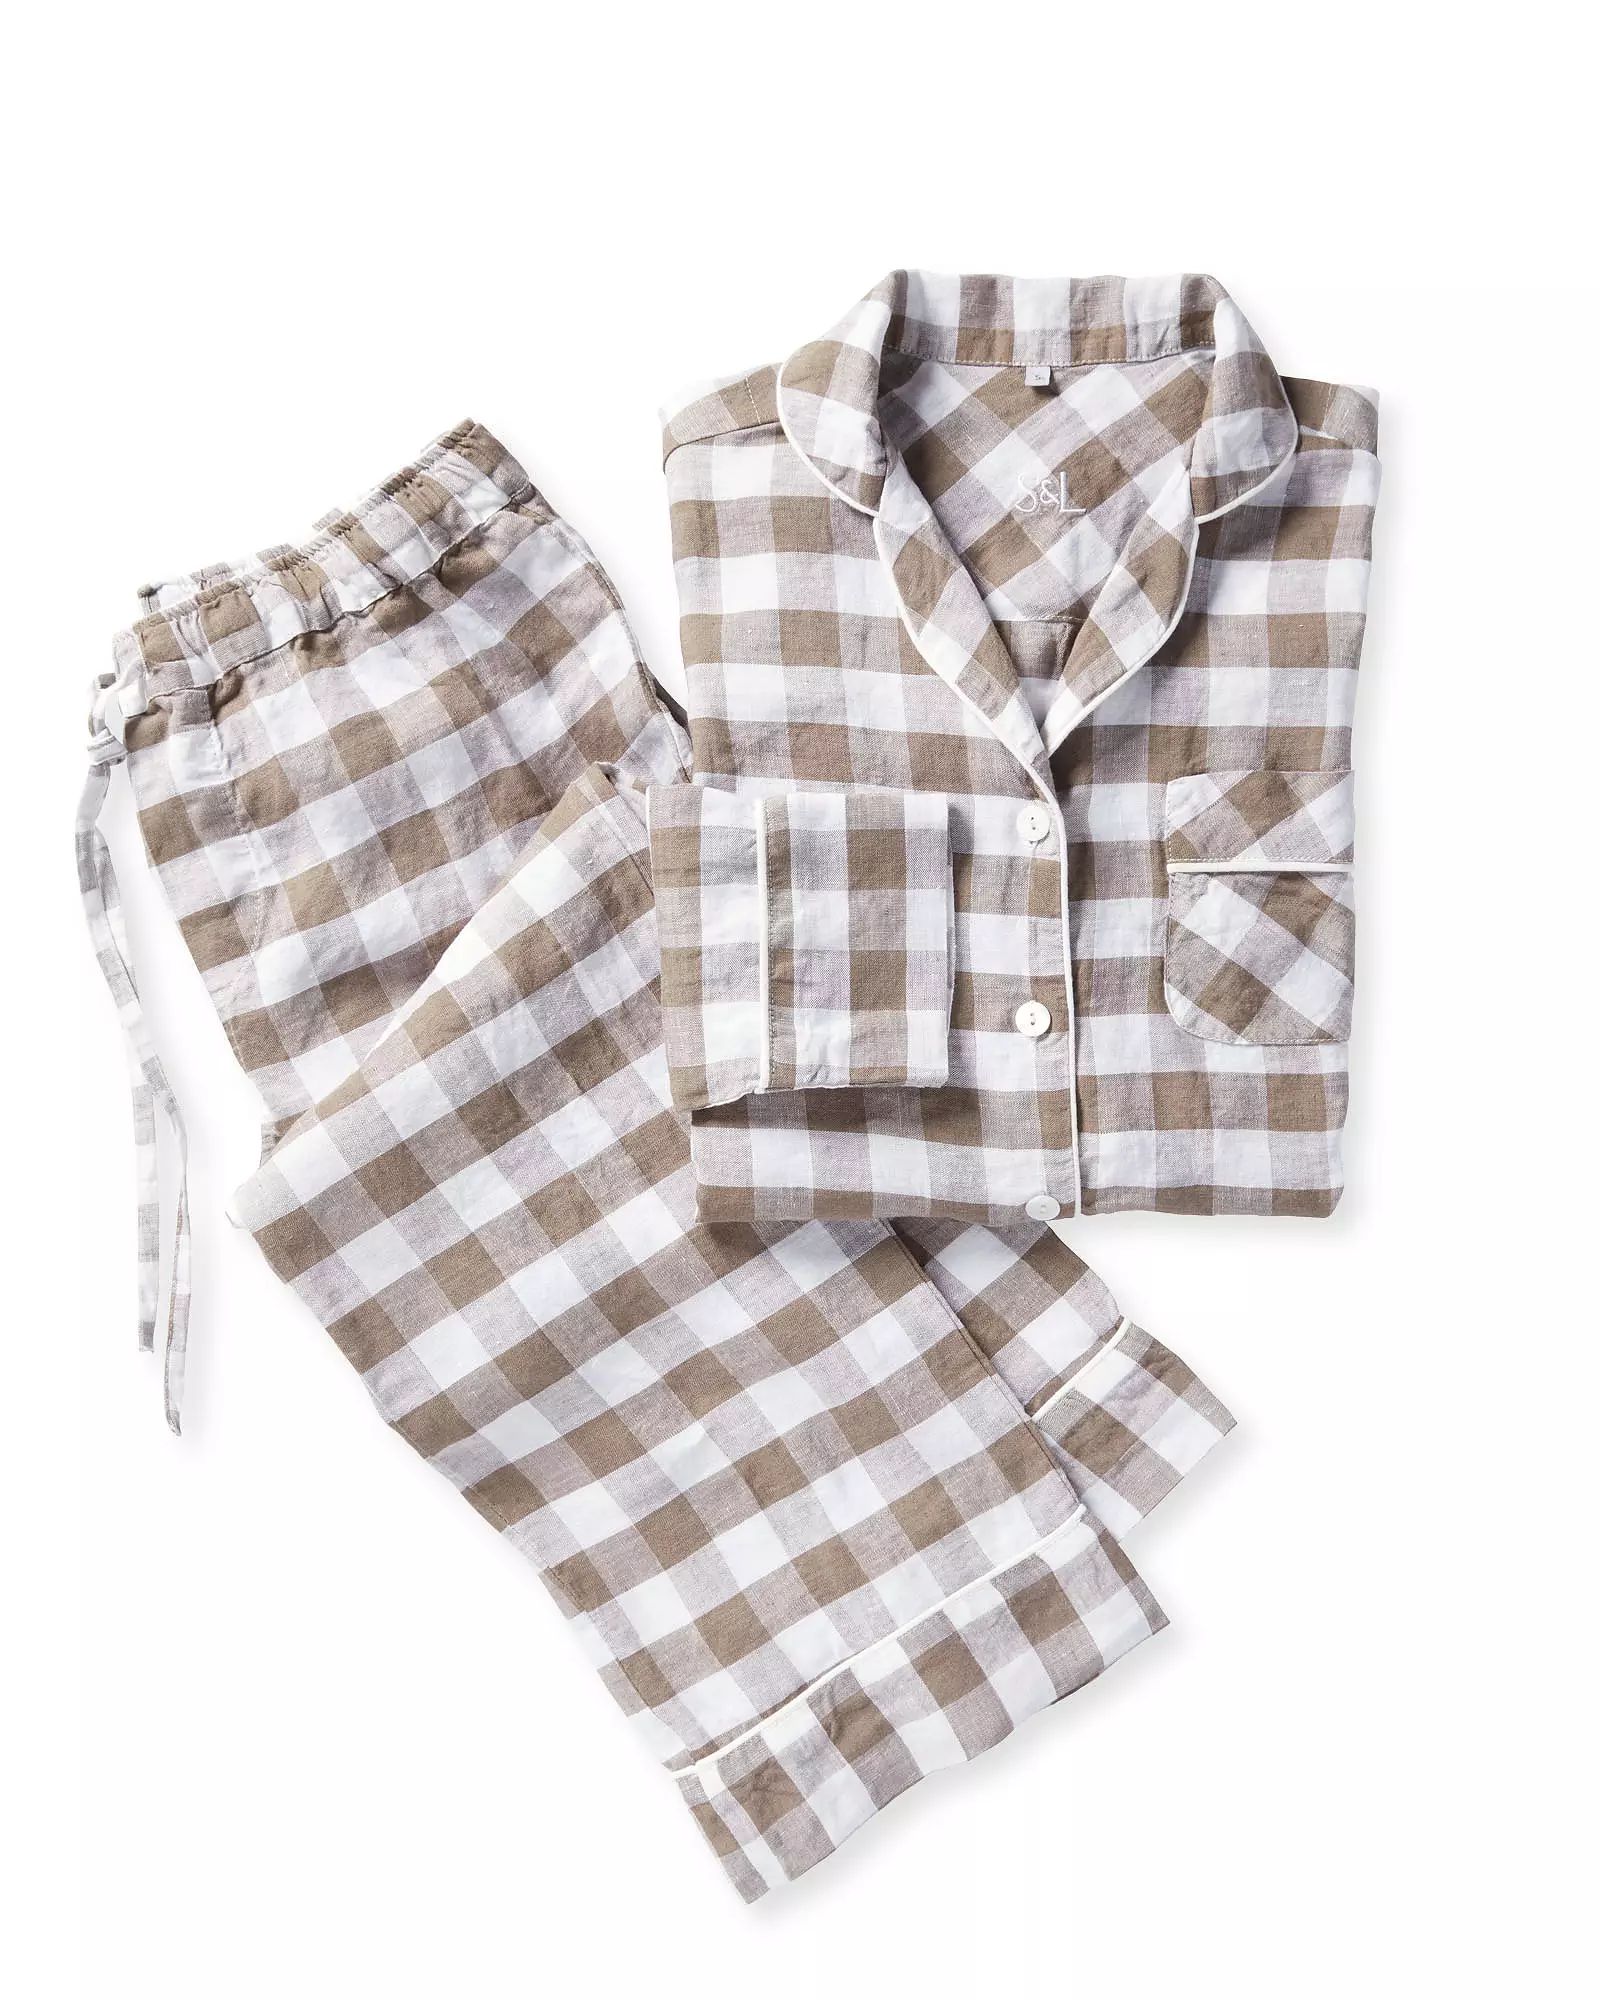 Hyannis Linen Pajamas | Serena and Lily